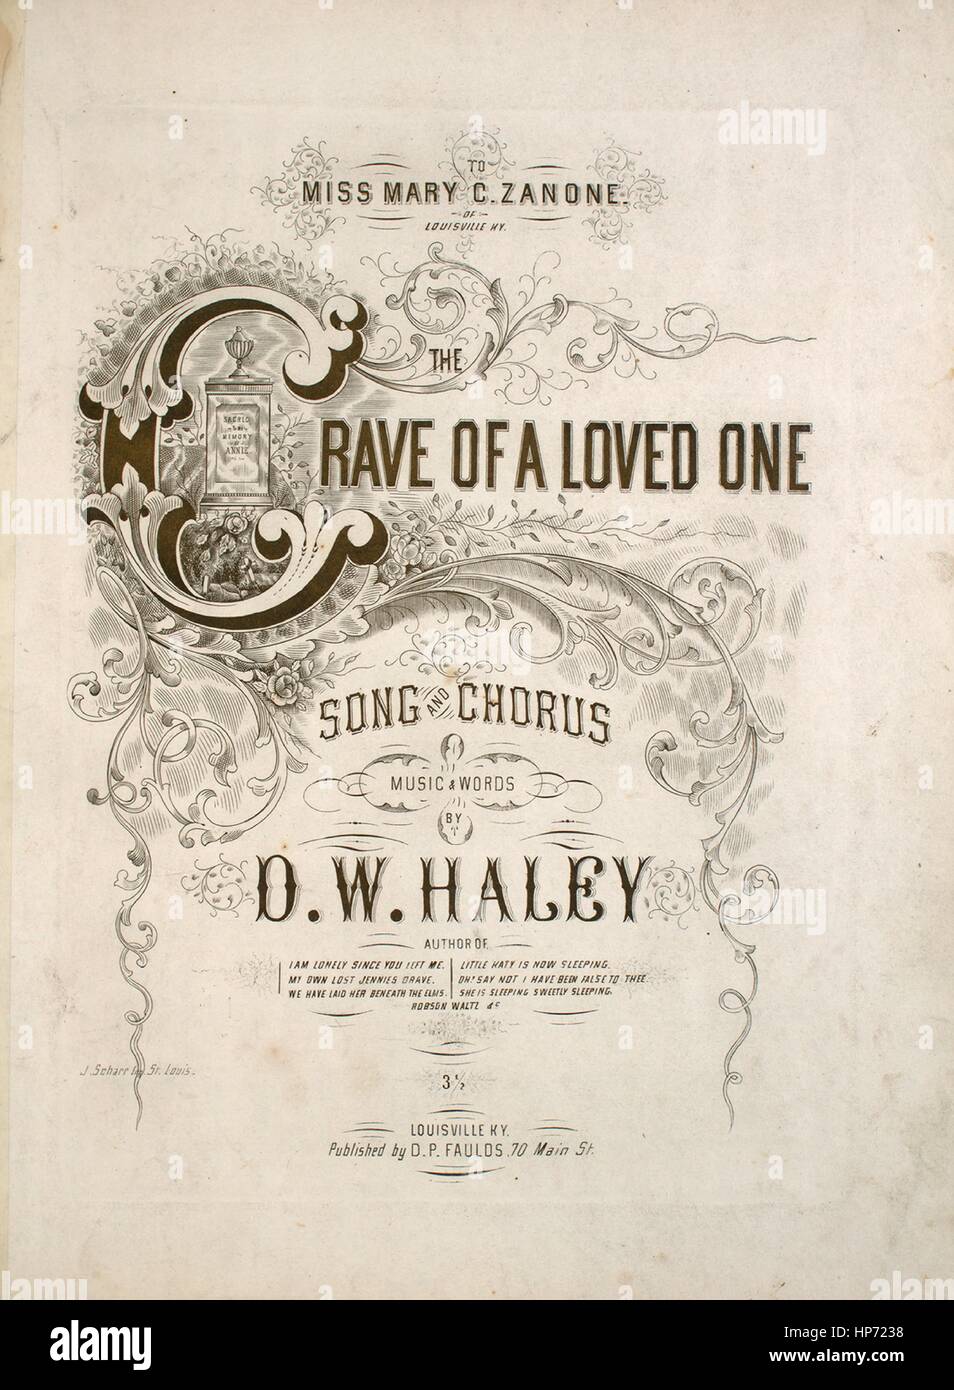 Sheet Music Cover Image Of The Song The Grave Of A Loved One Song And Chorus With Original Authorship Notes Reading Music And Words By Dw Haley 1866 The Publisher Is Listed